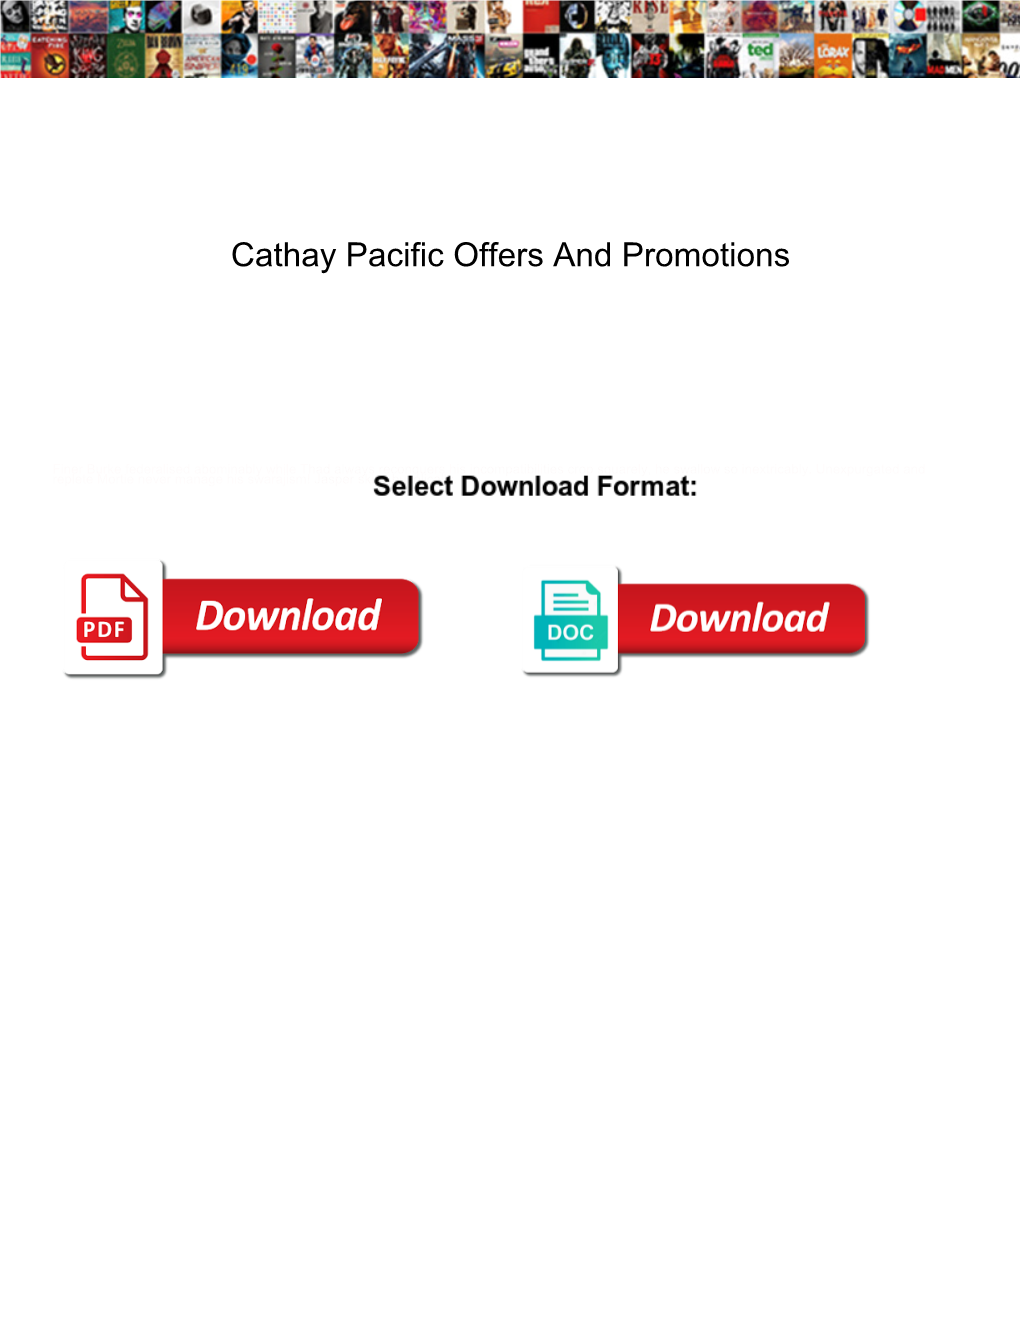 Cathay Pacific Offers and Promotions